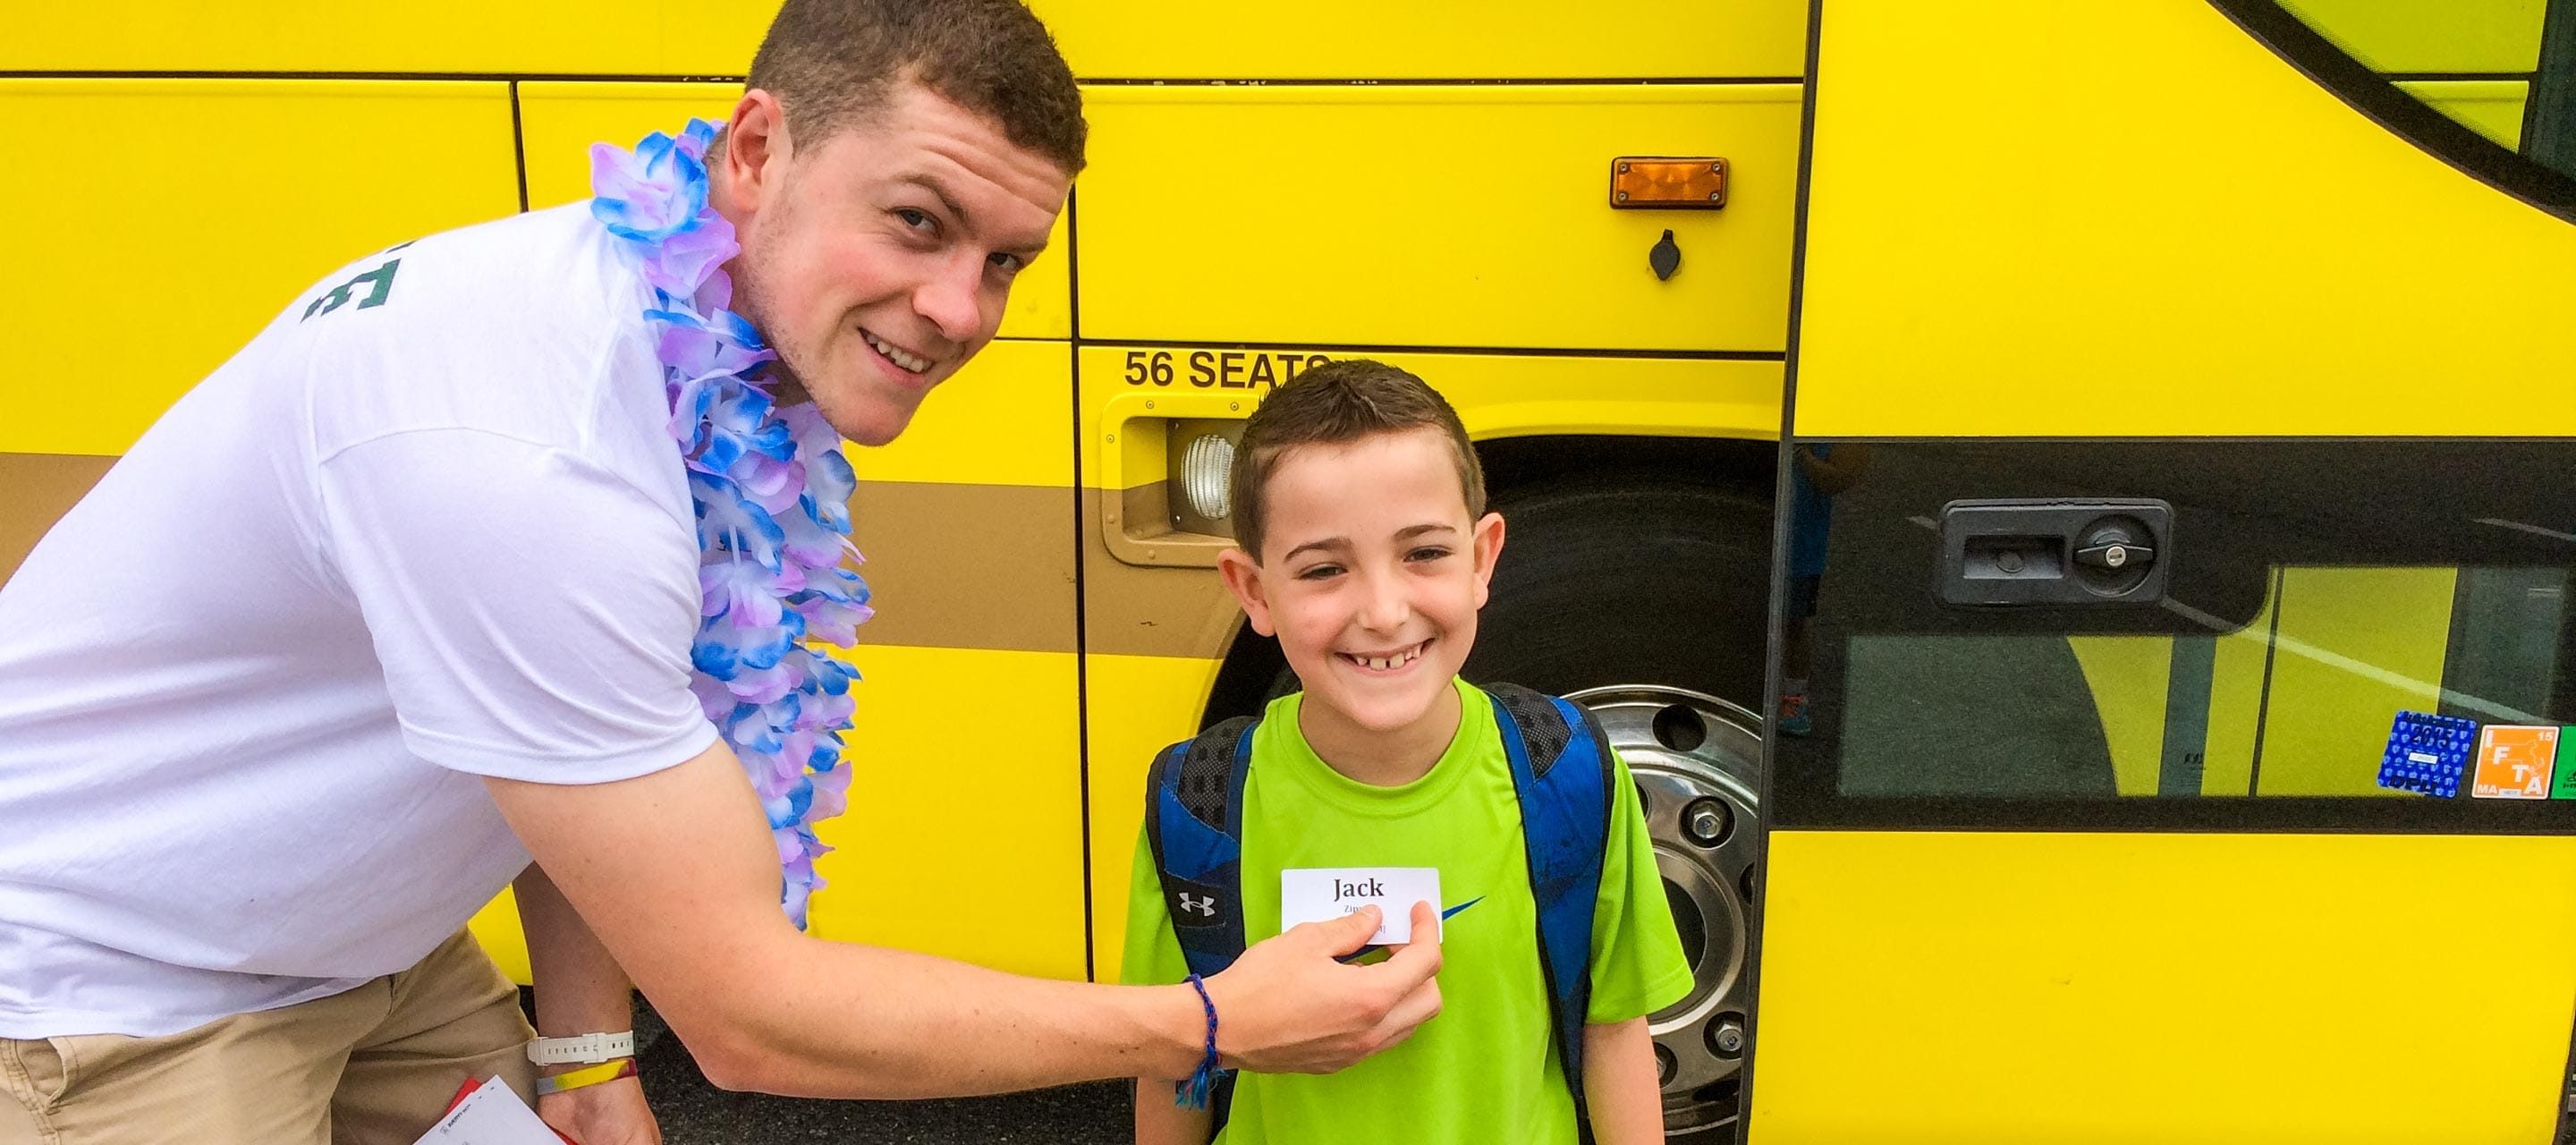 Putting name tag on camper by school bus